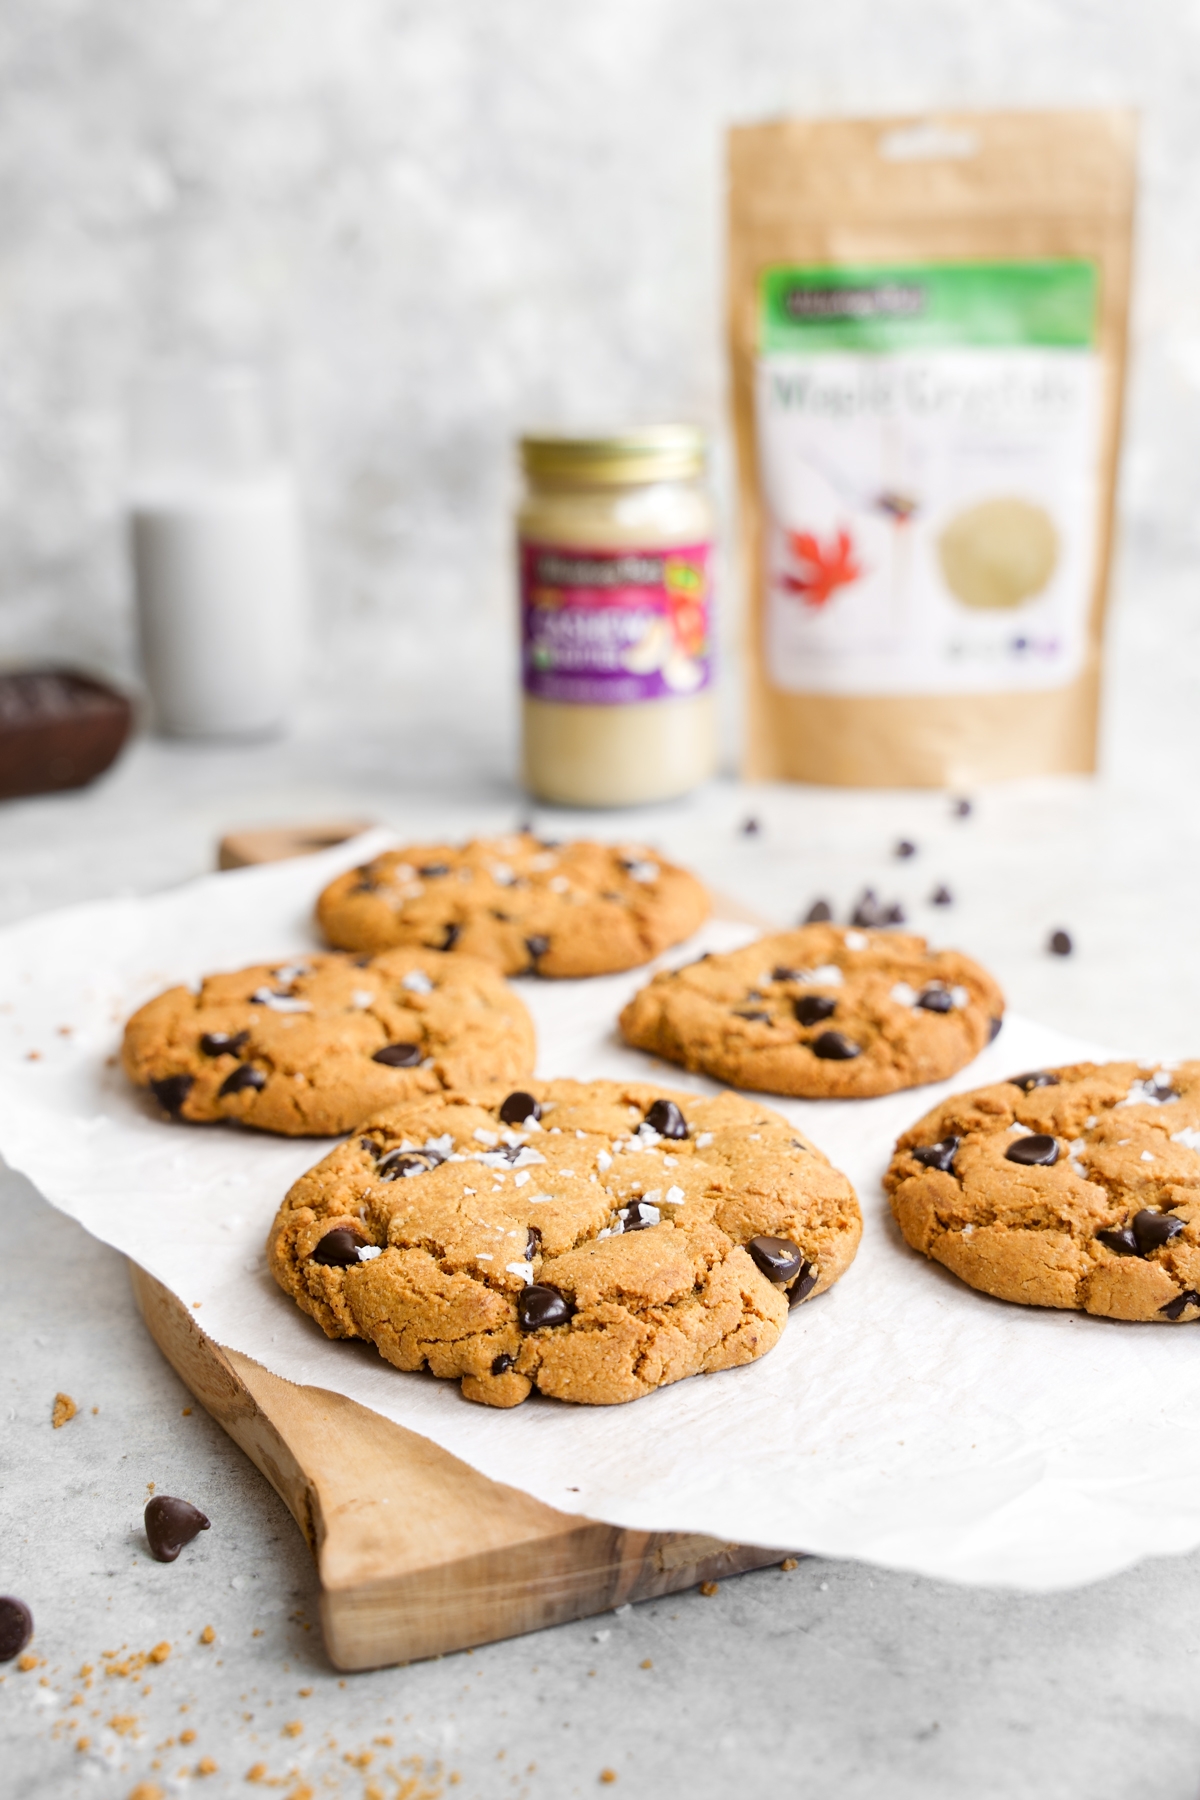 the butter-free and refined sugar-free cookies with sea salt on top